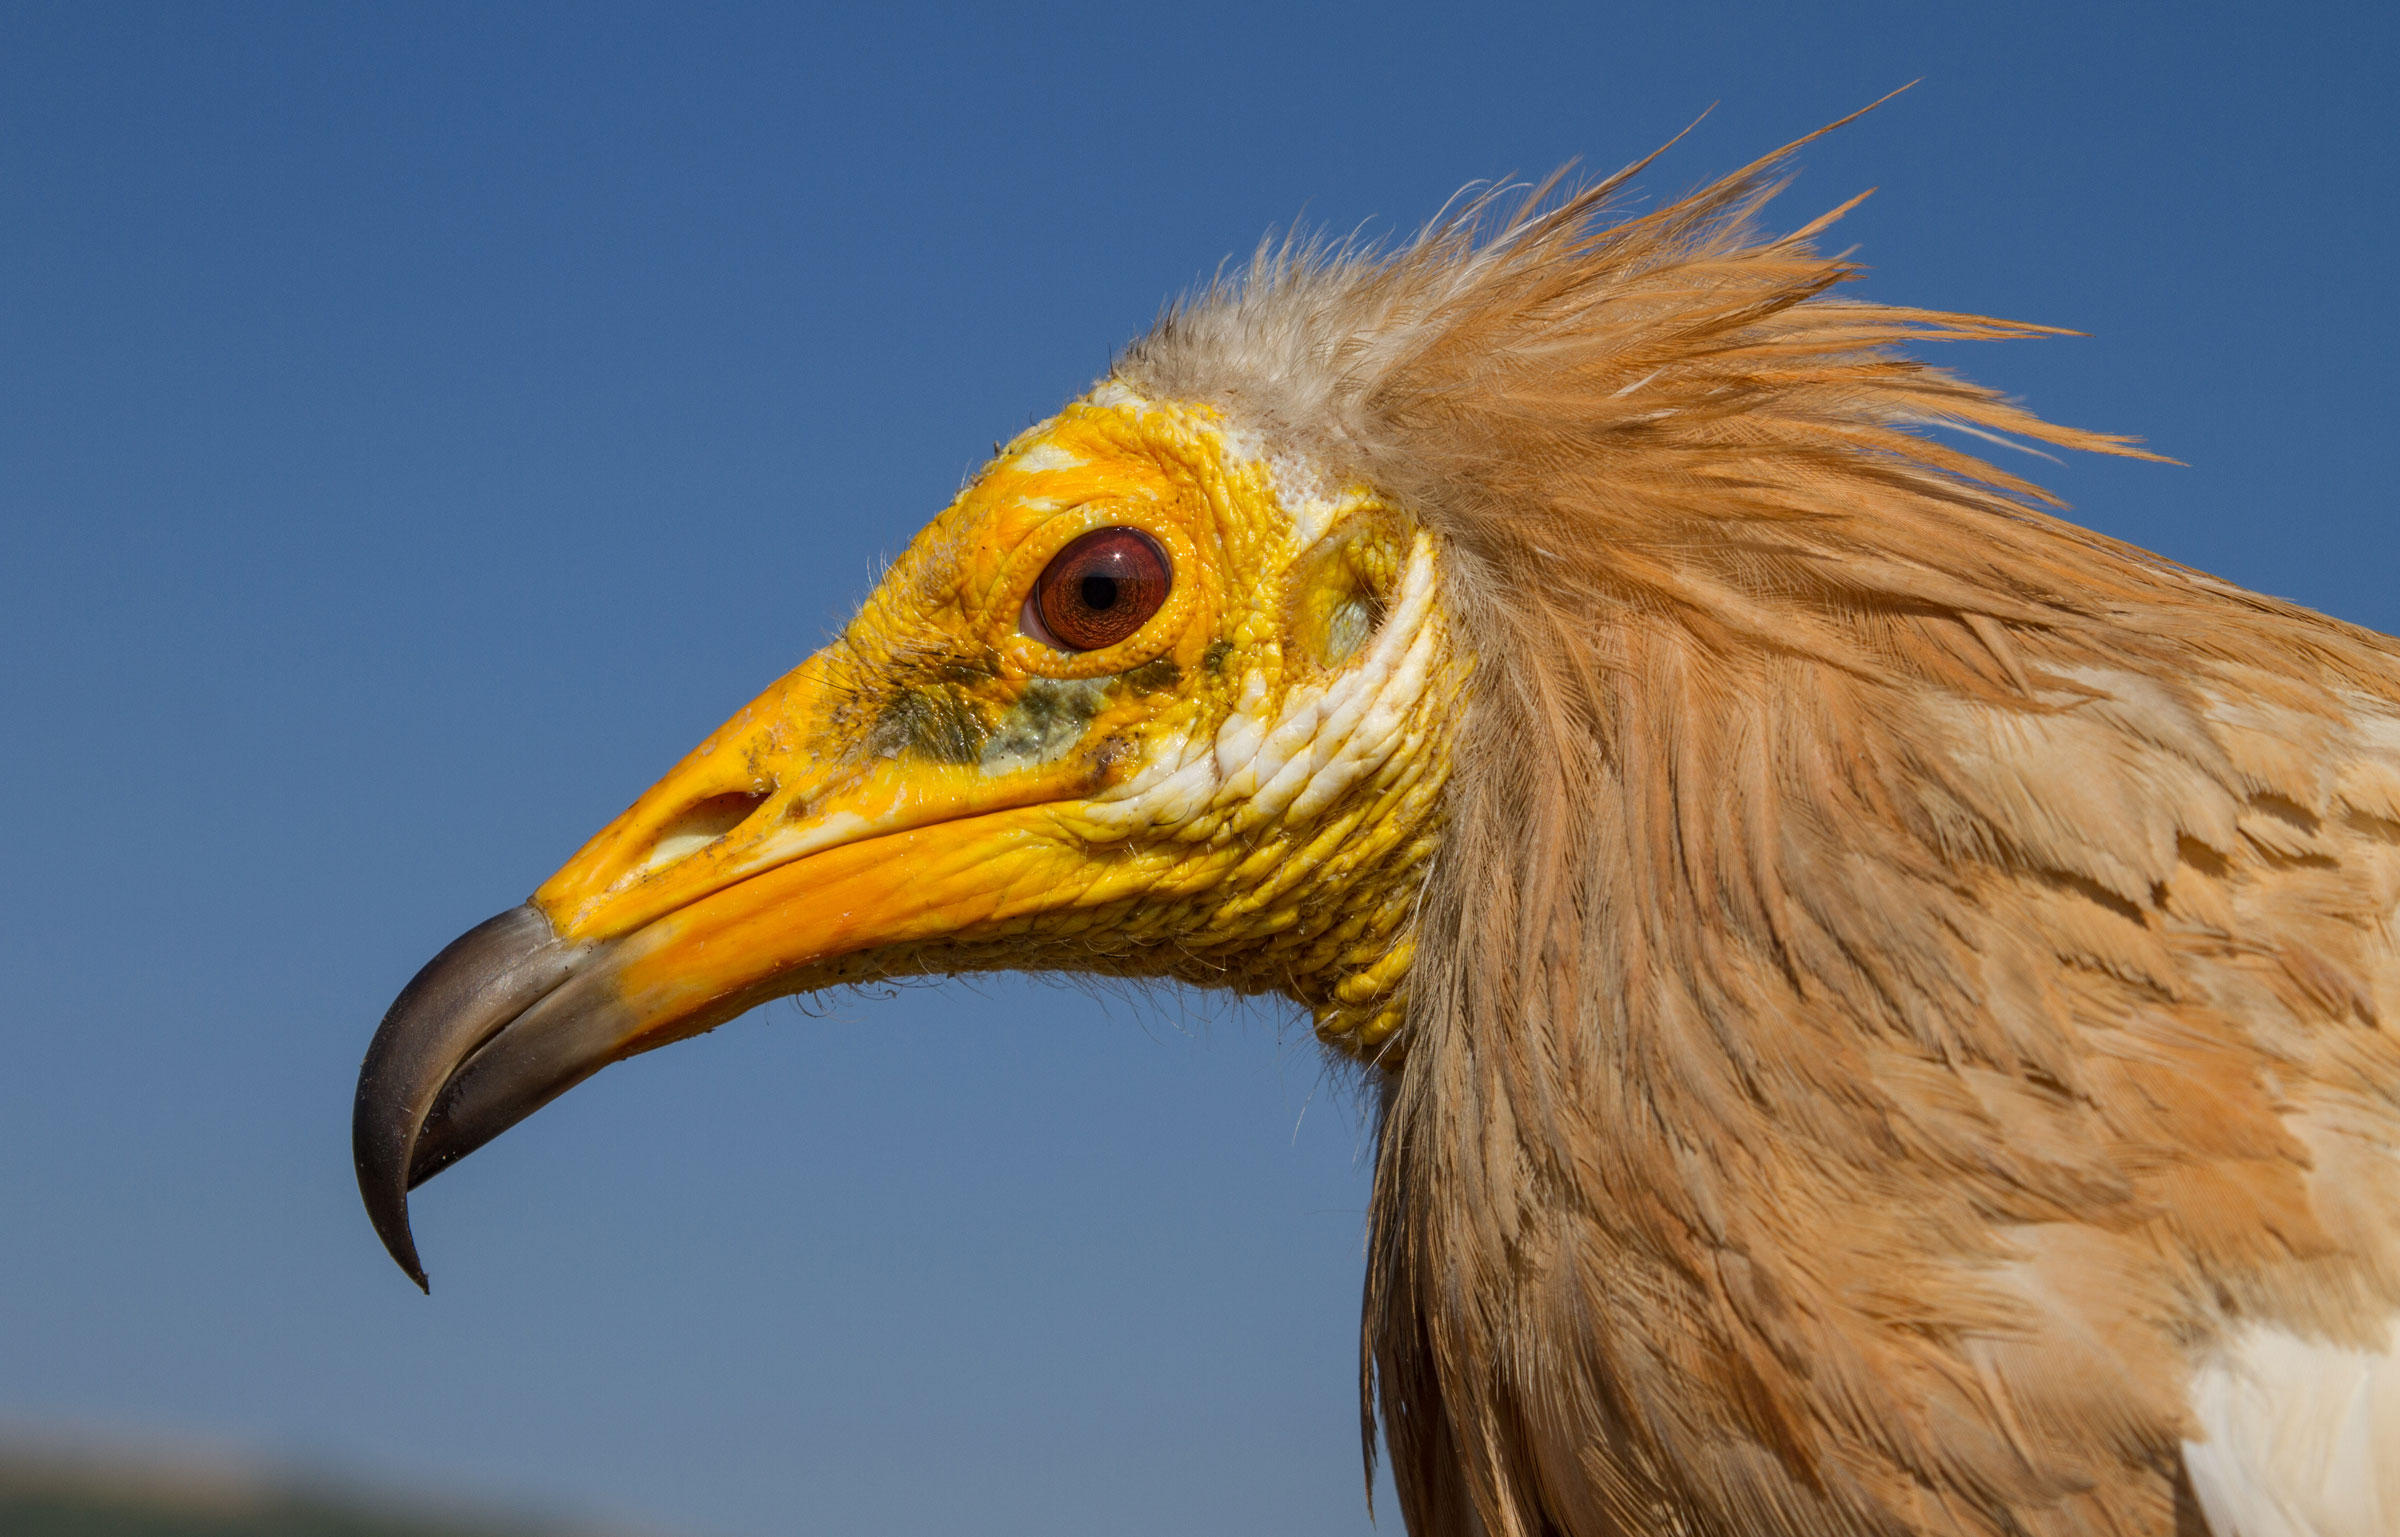 Can We Save the World's Vultures? | Audubon